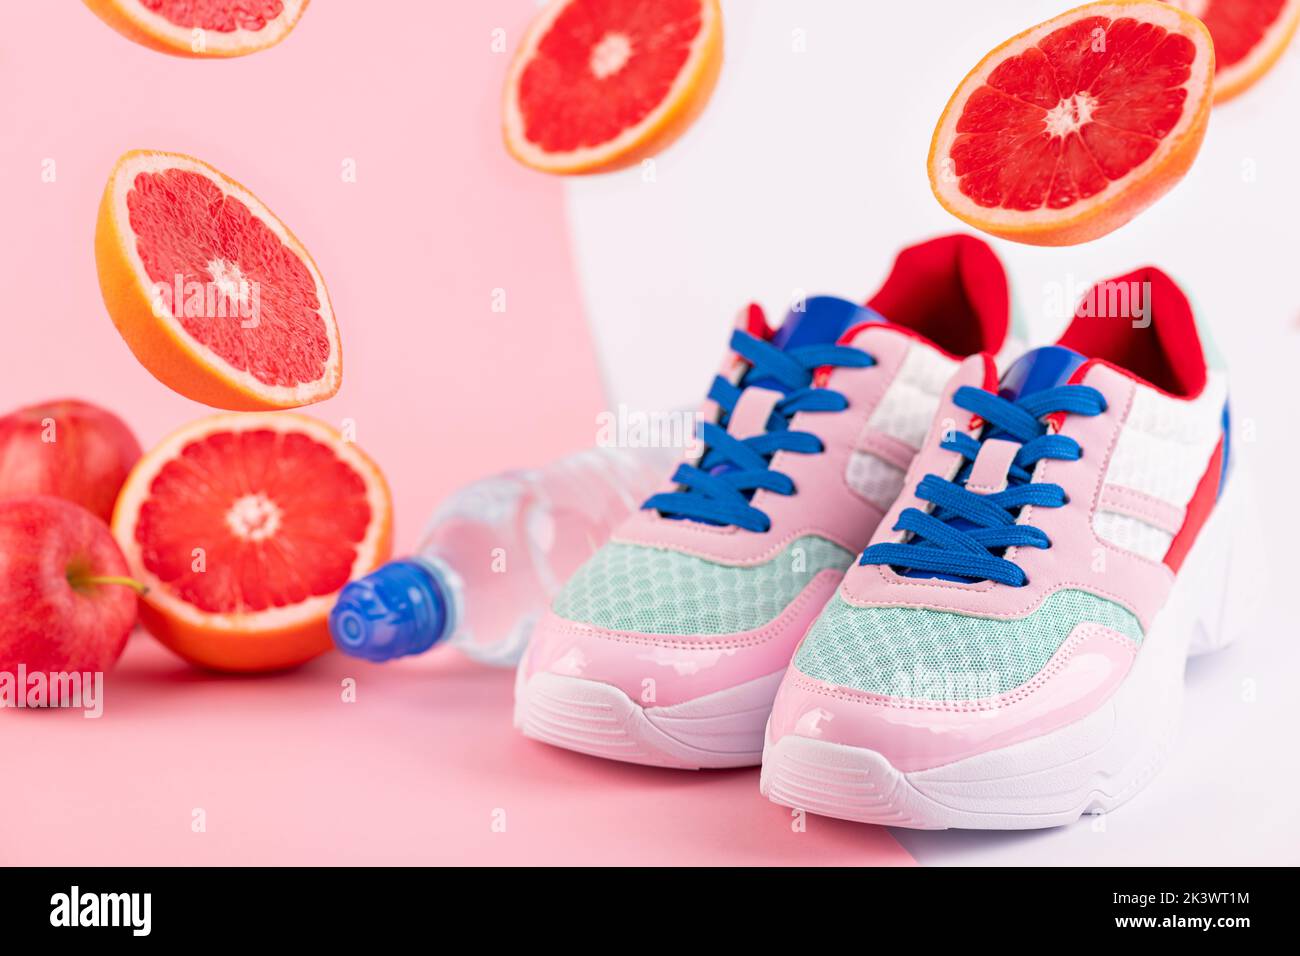 Sport equipment sport shoes, bottle of water, citrus fruits grapefruits on pink and white background. Healthy lifestyle, fitness, diet, slimming conce Stock Photo